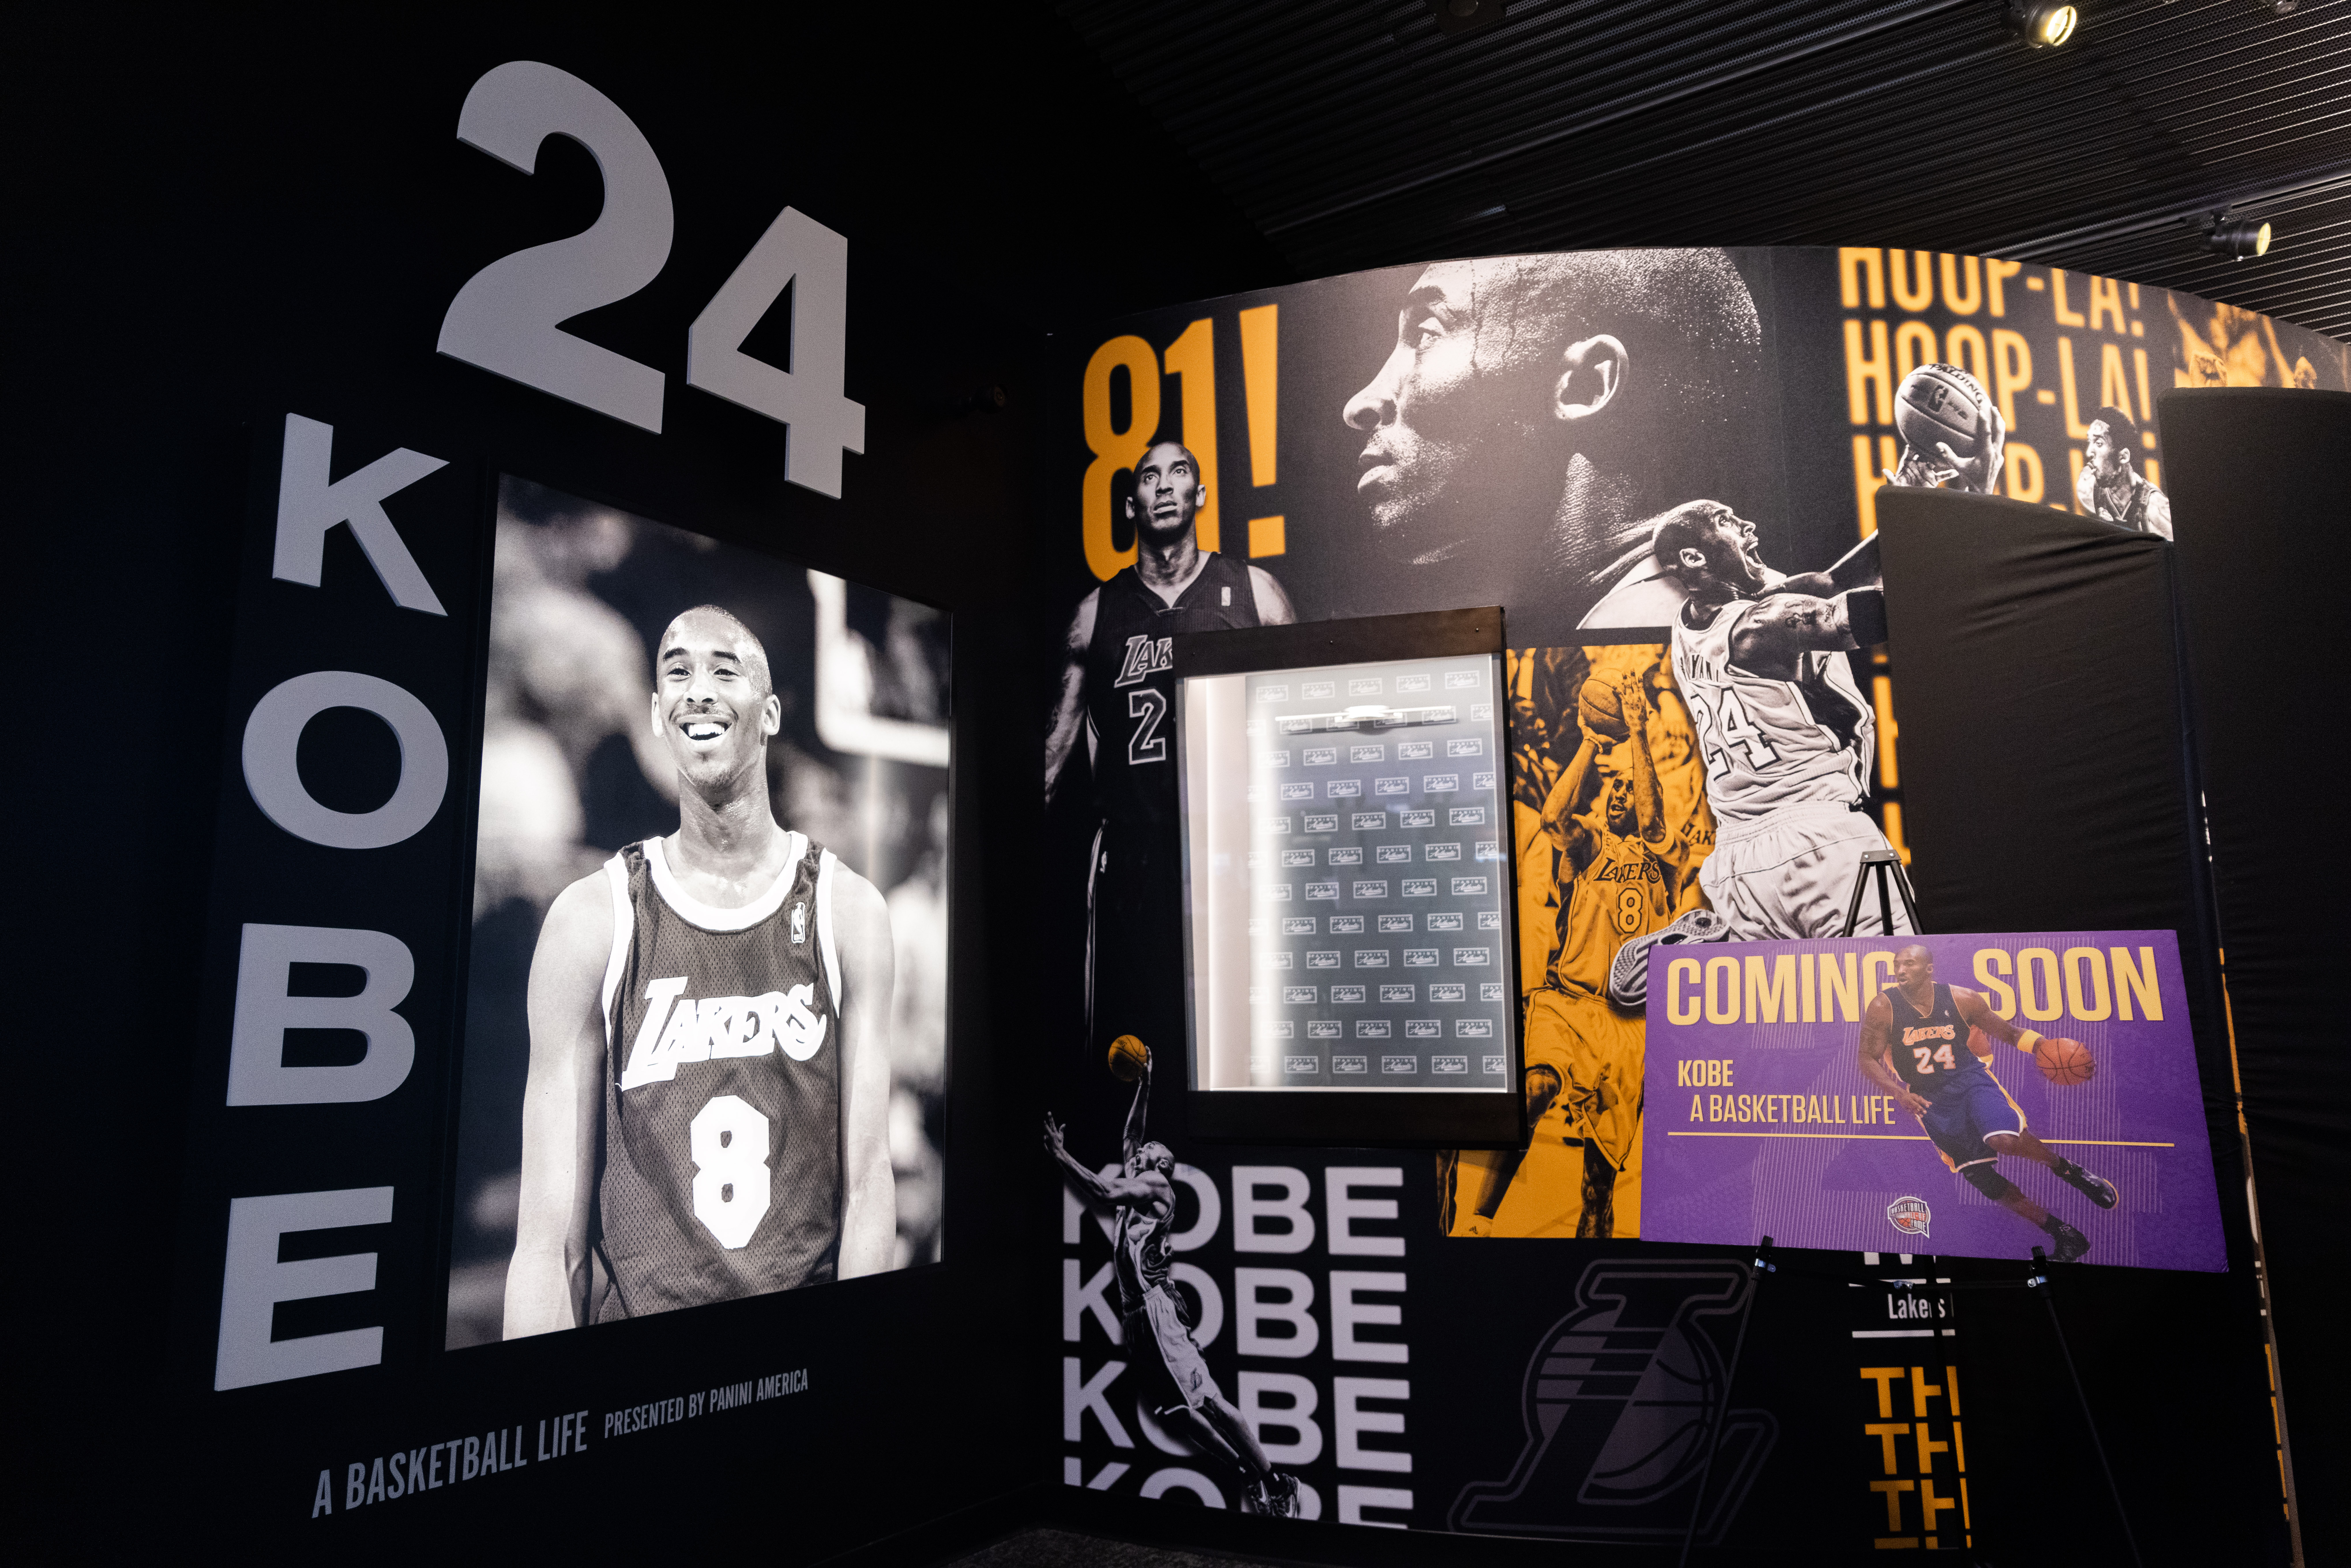 Kobe Bryant exhibit at center of Basketball Hall of Fame's